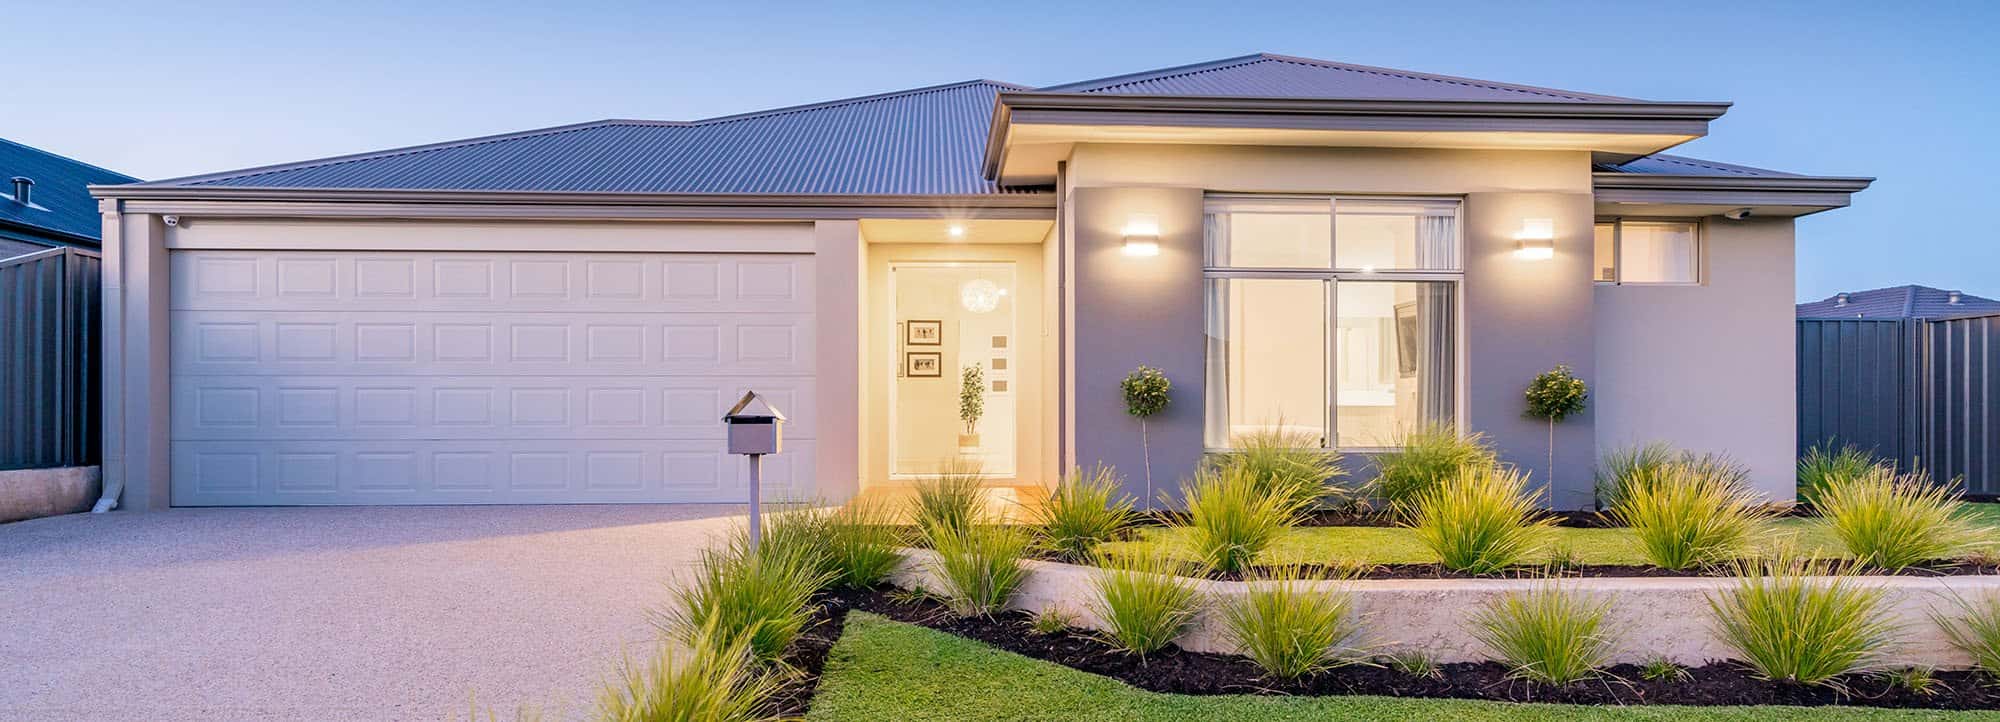 New Home Pre-Handover Inspection Report, Practical Completion Inspection PCI , Port Stephens, Newcastle, Hunter Valley, Lake Macquarie